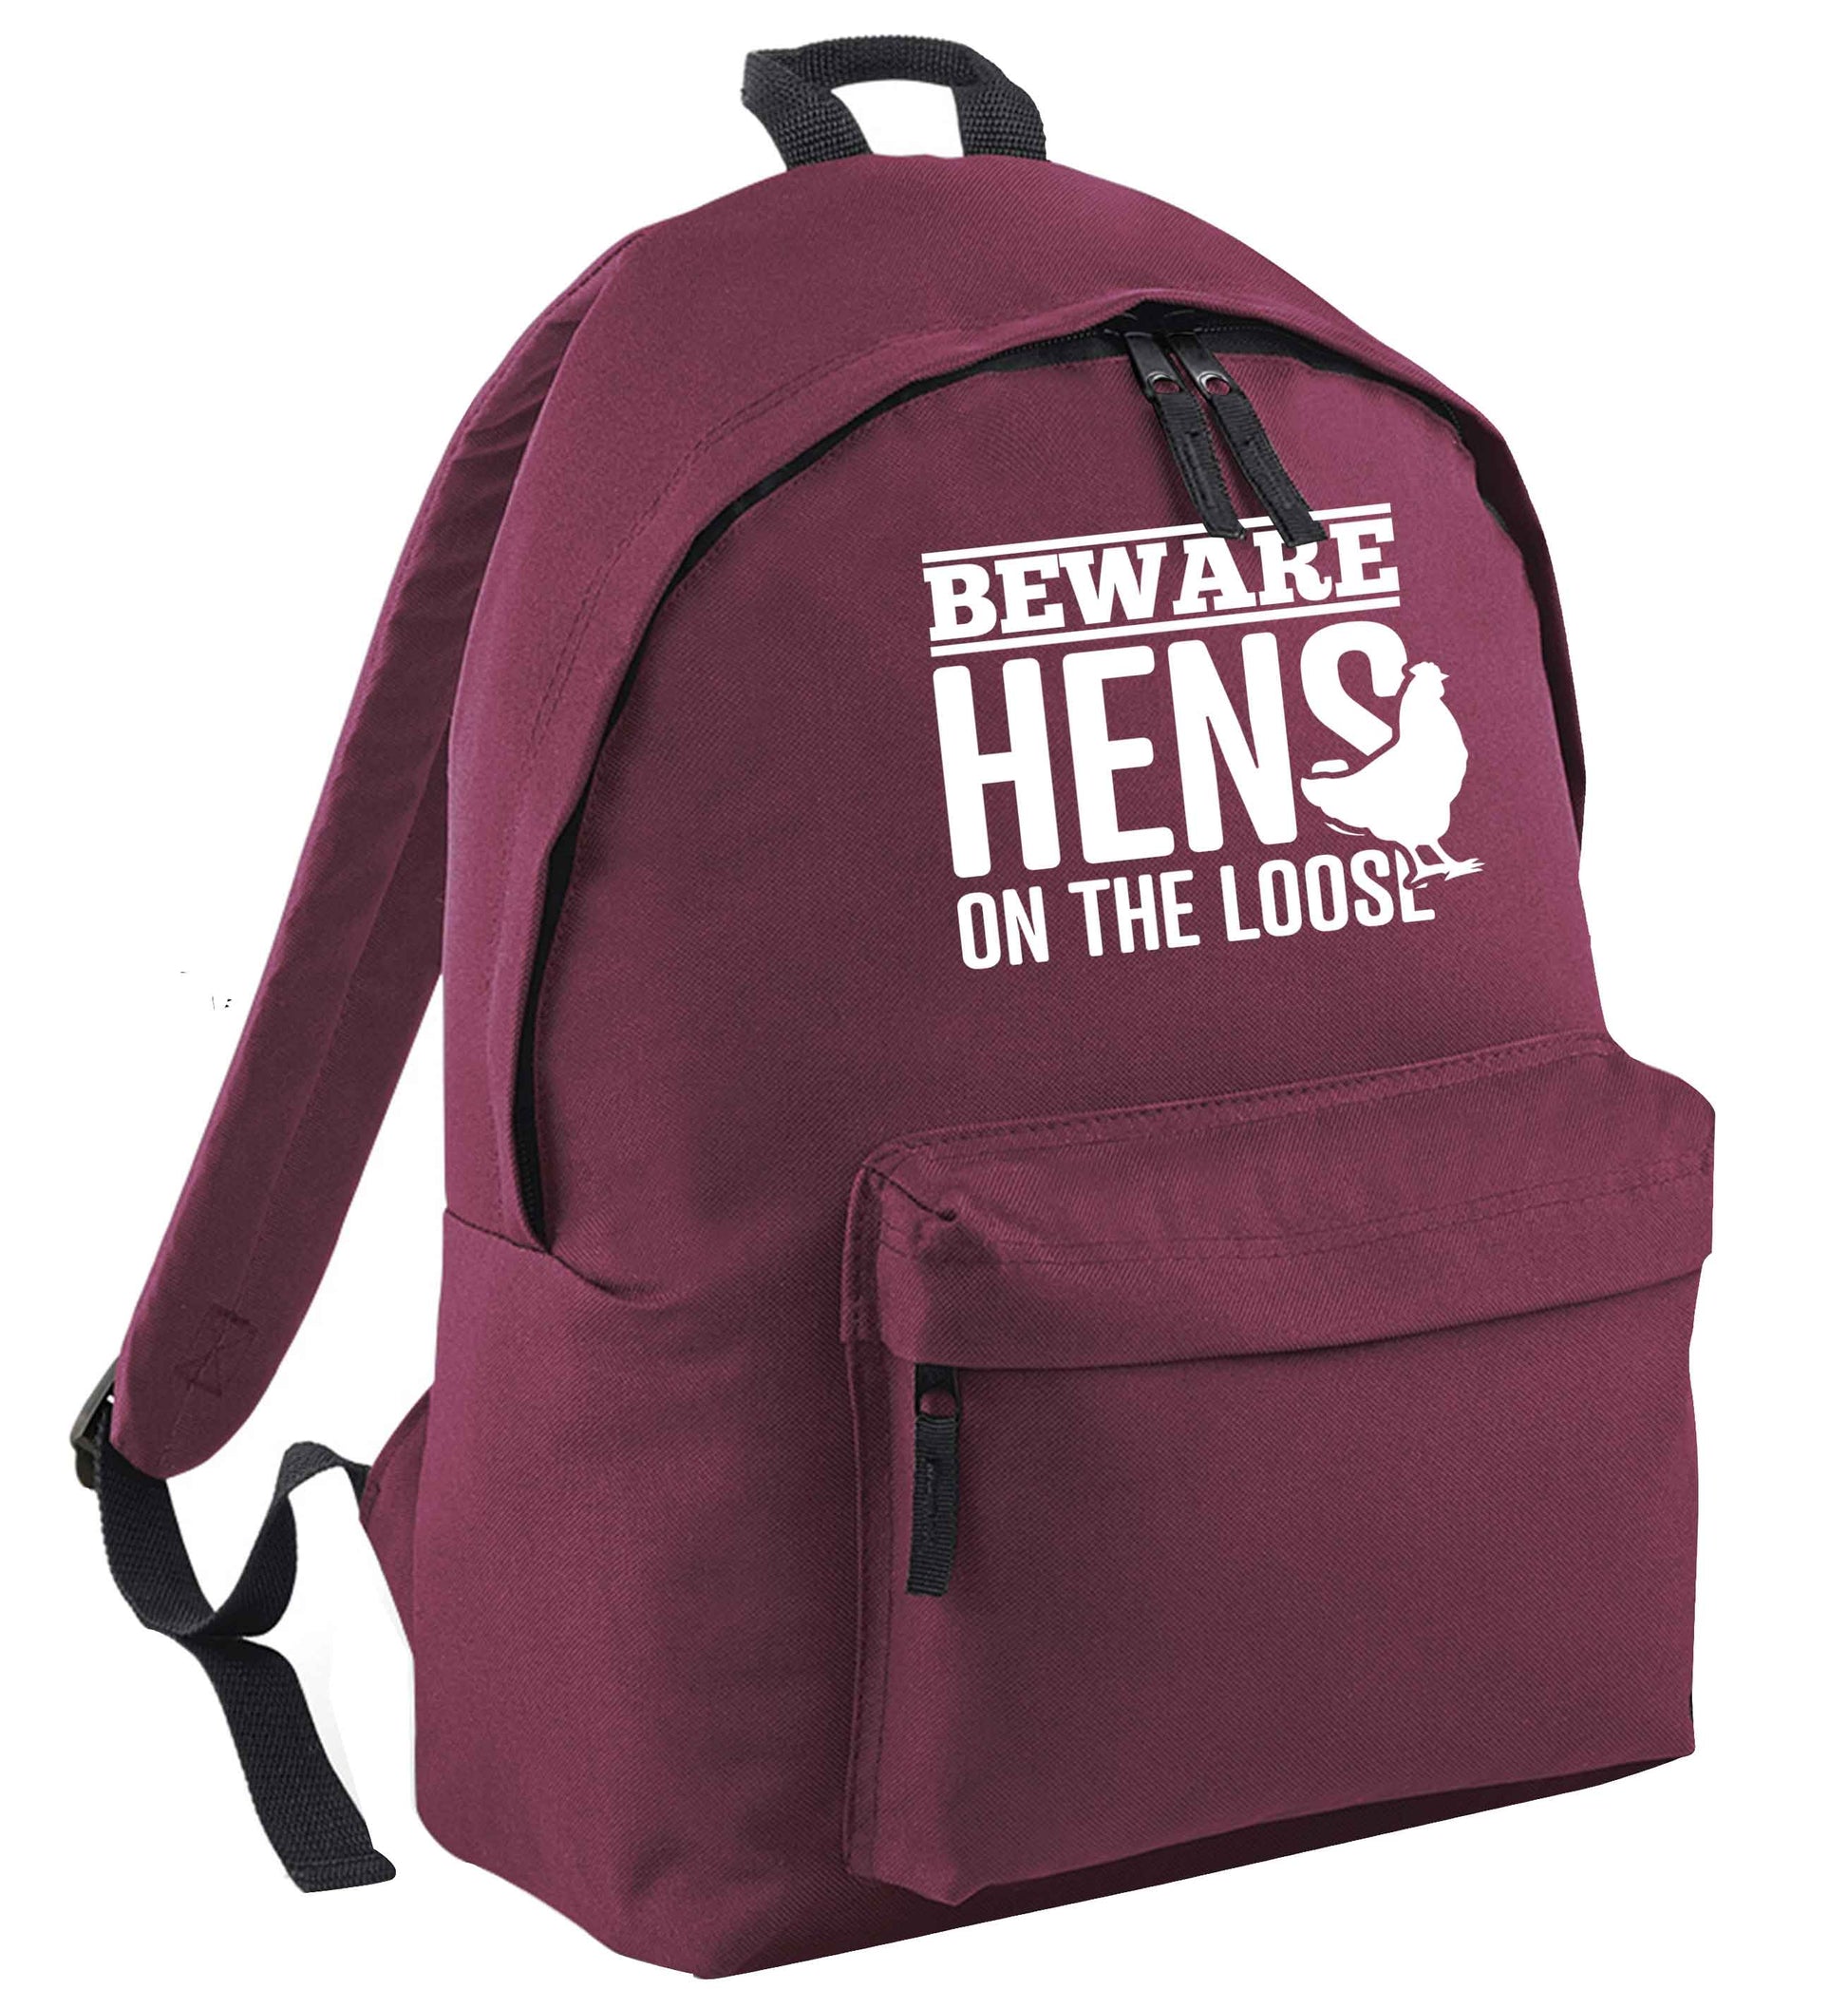 Beware hens on the loose maroon adults backpack